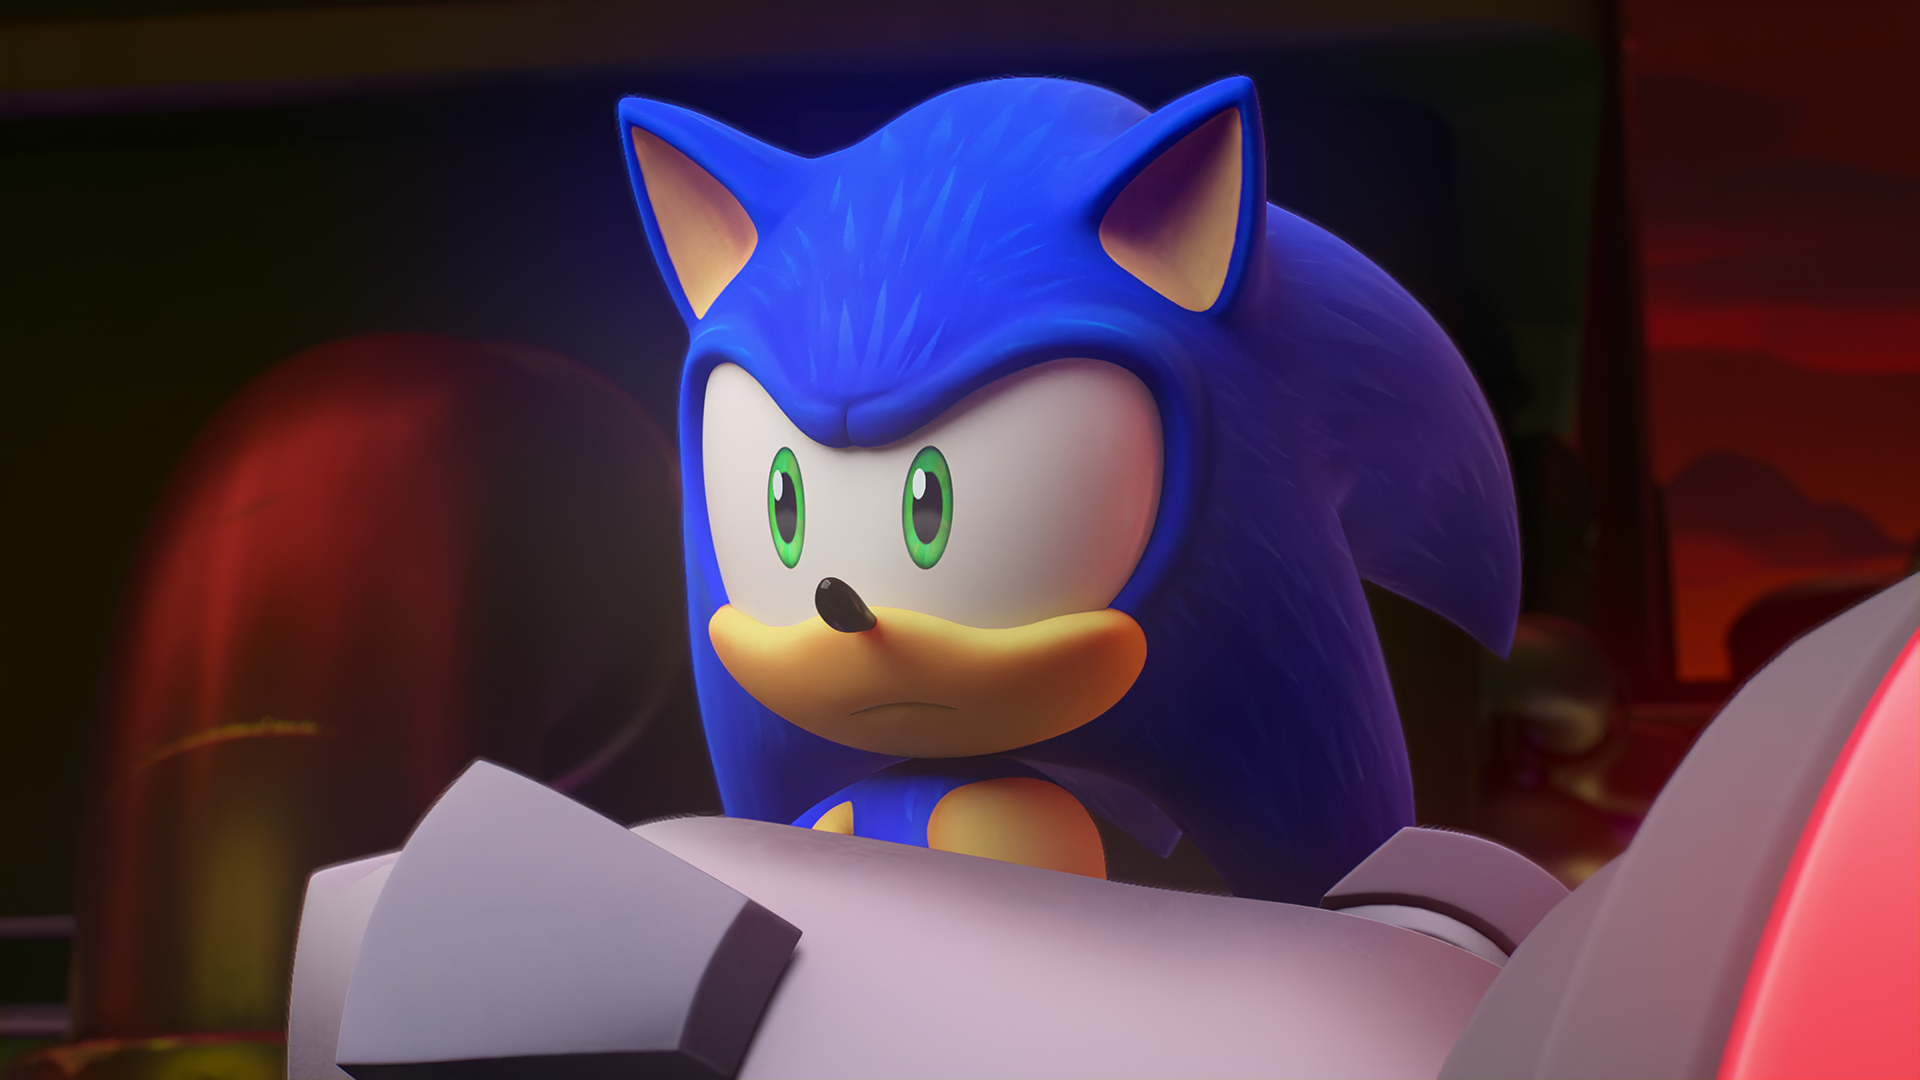 Sonic Prime - Sonic #20 by SonicBoomGirl23 on DeviantArt